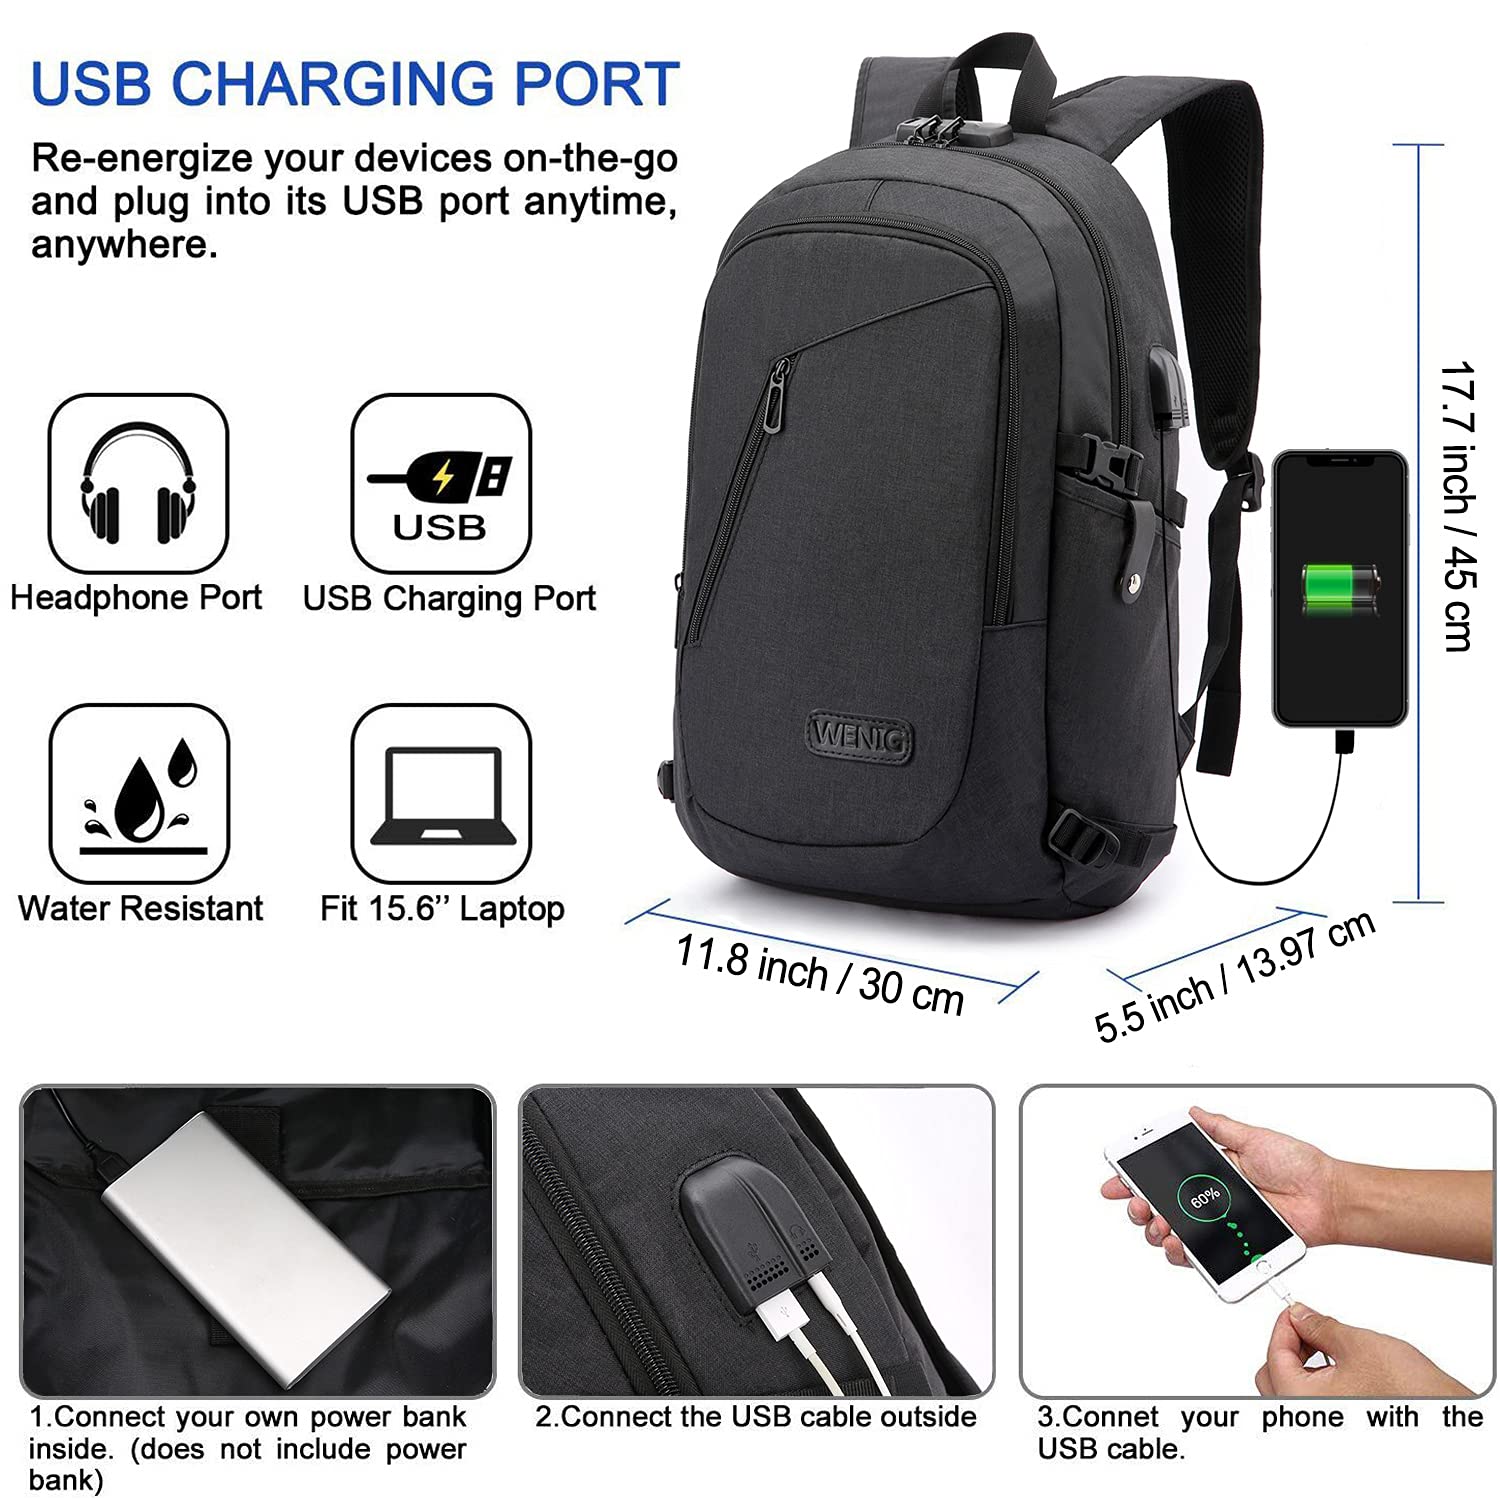 Travel Laptop Backpack,Anti Theft Business Slim Laptop Backpack with USB Charging Port Lock,Durable Water Resistant Work Computer Bag for Laptop College Bookbags Fits 15.6 Inch Laptop Notebook,Black